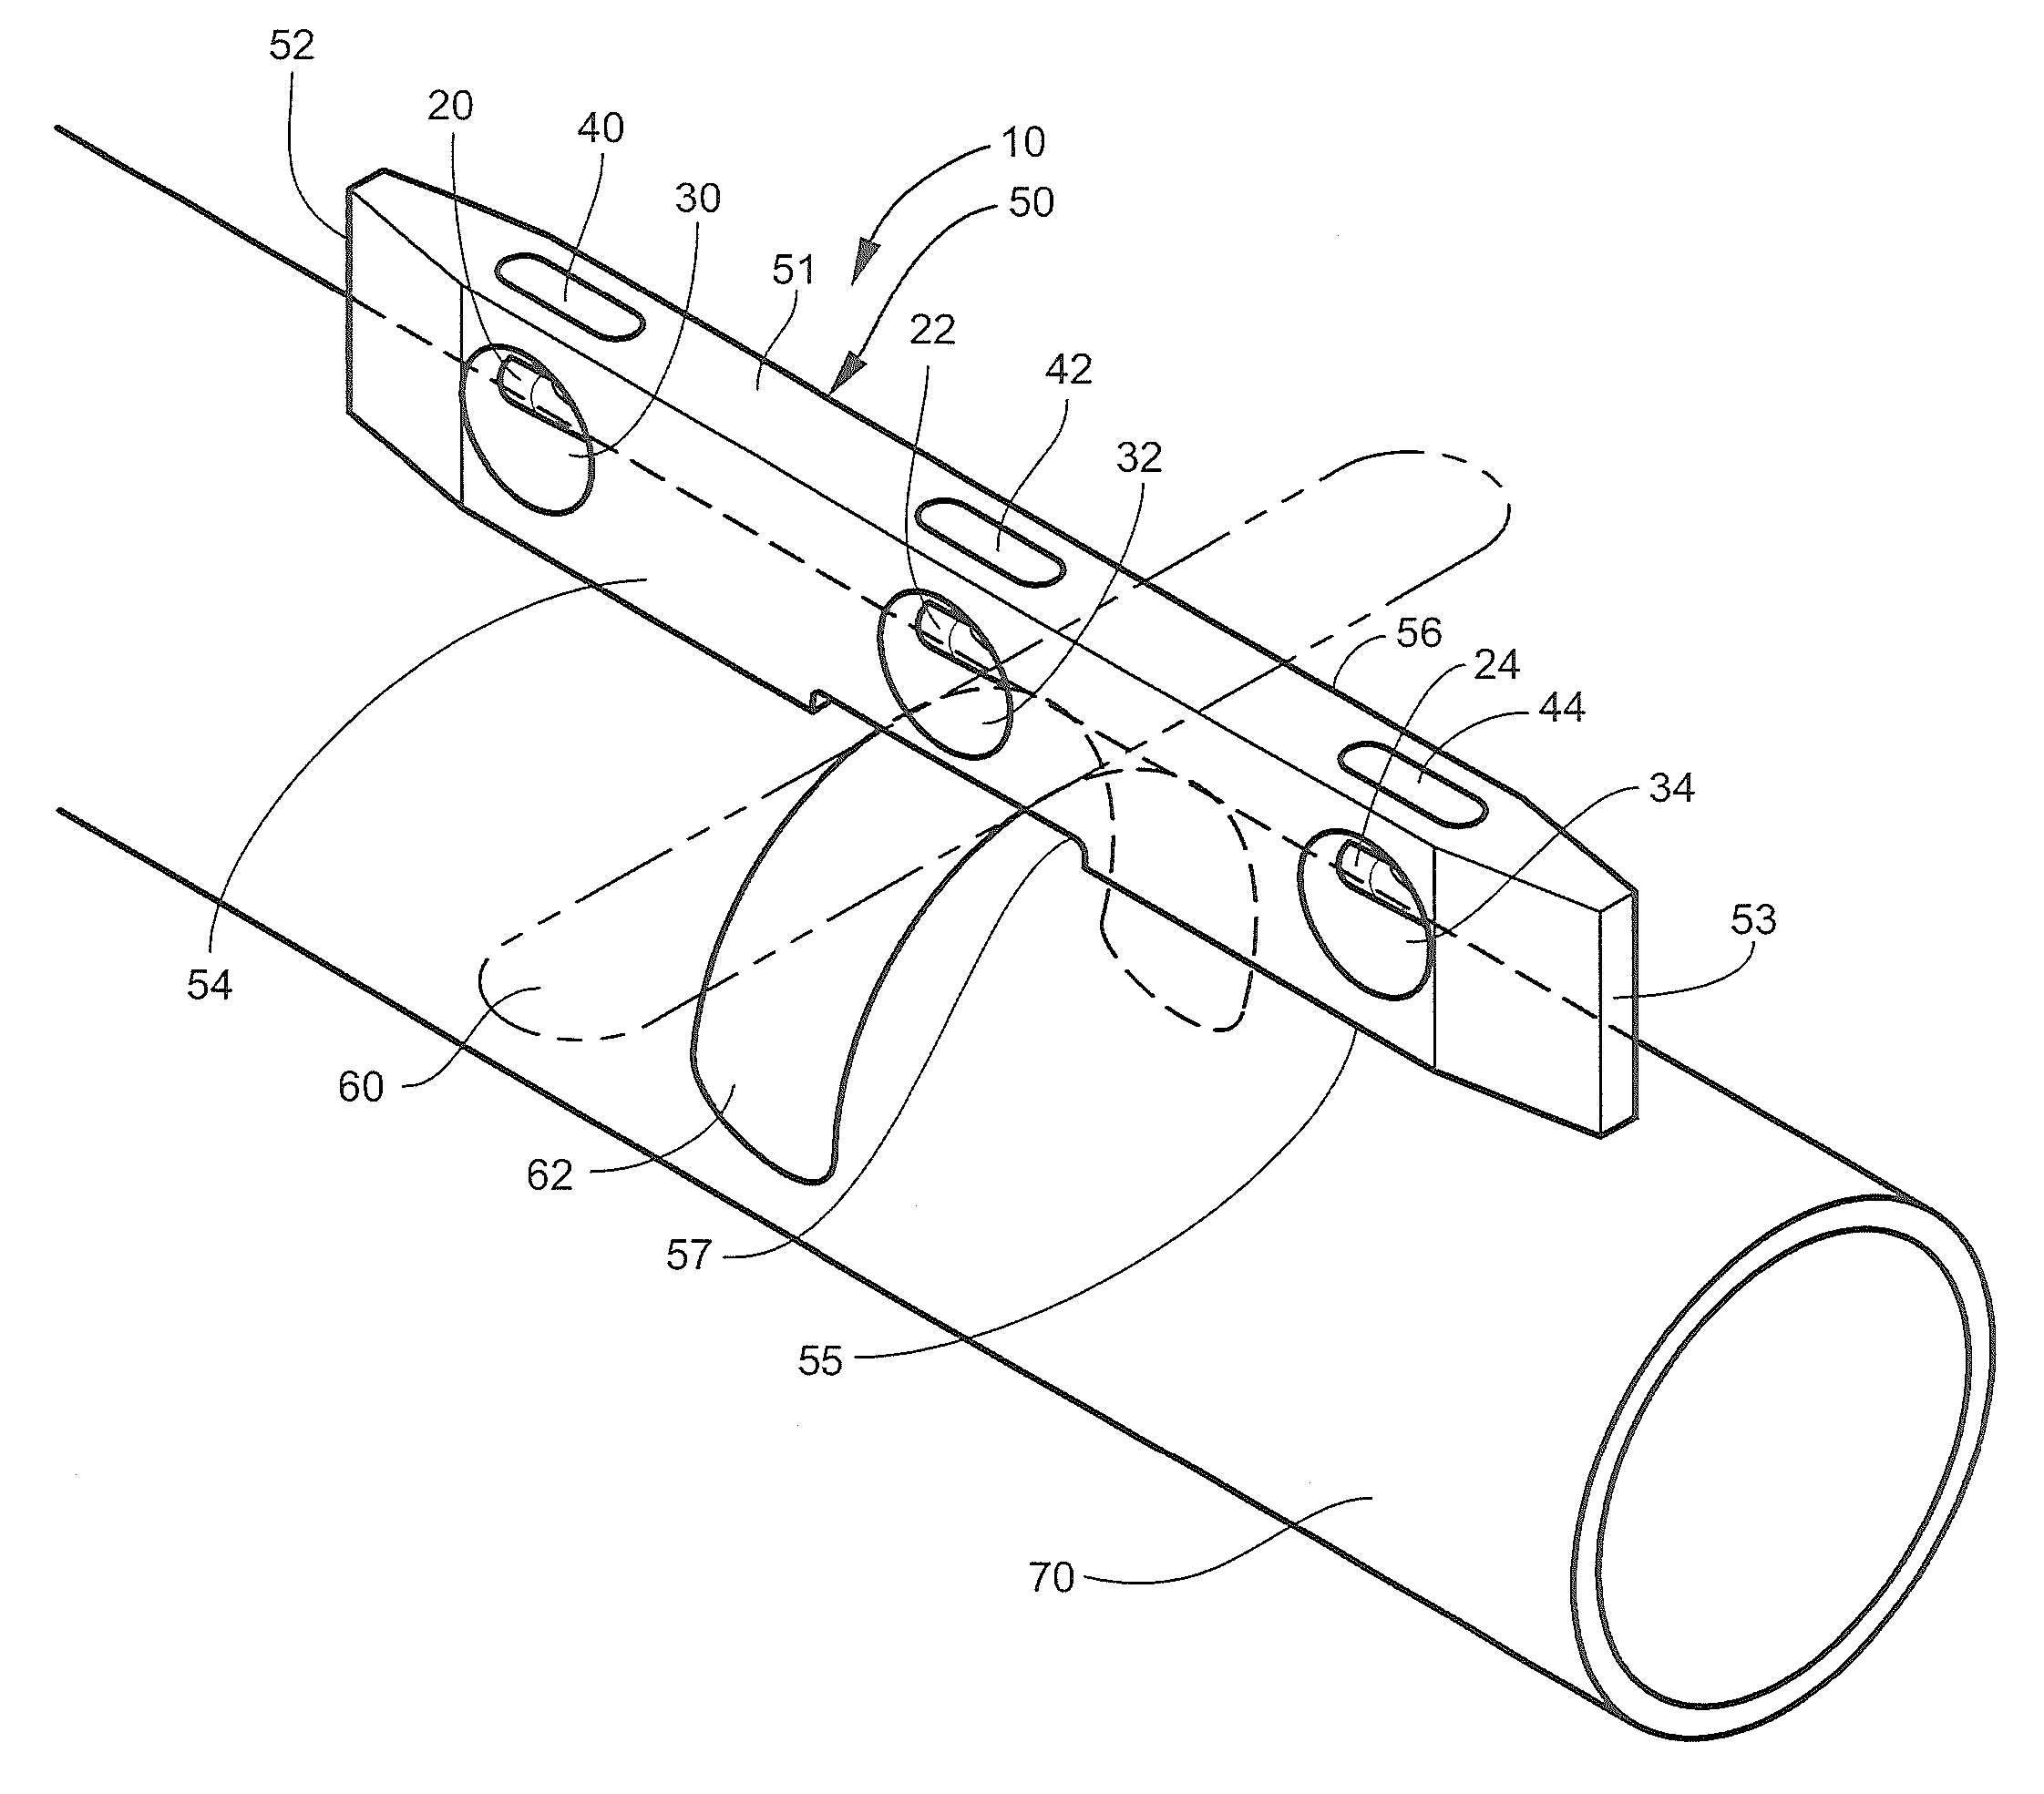 Device and method for measuring and adjusting the slope of a surface